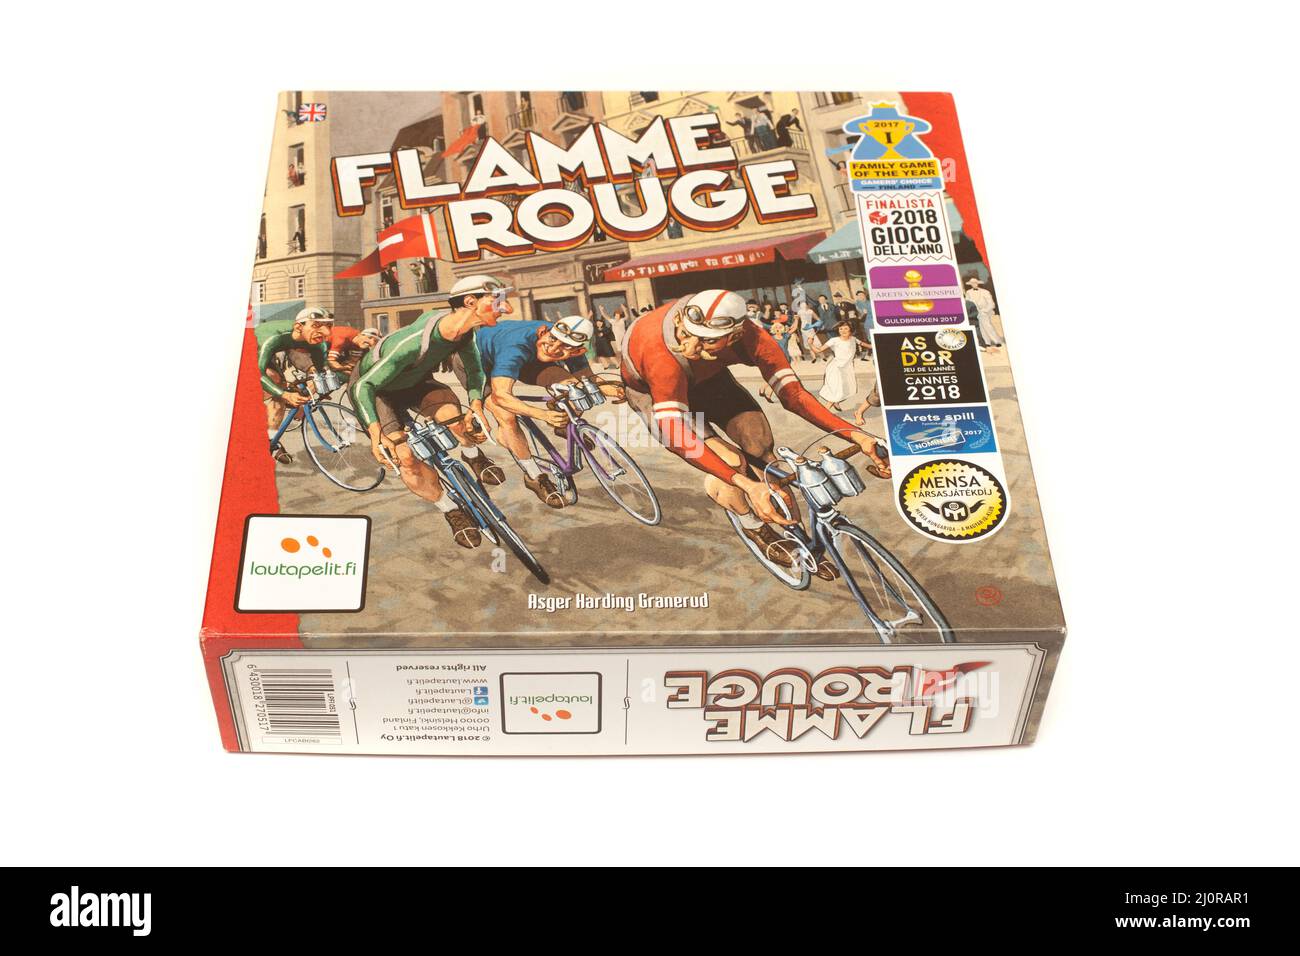 The board game Flamme Rouge Stock Photo